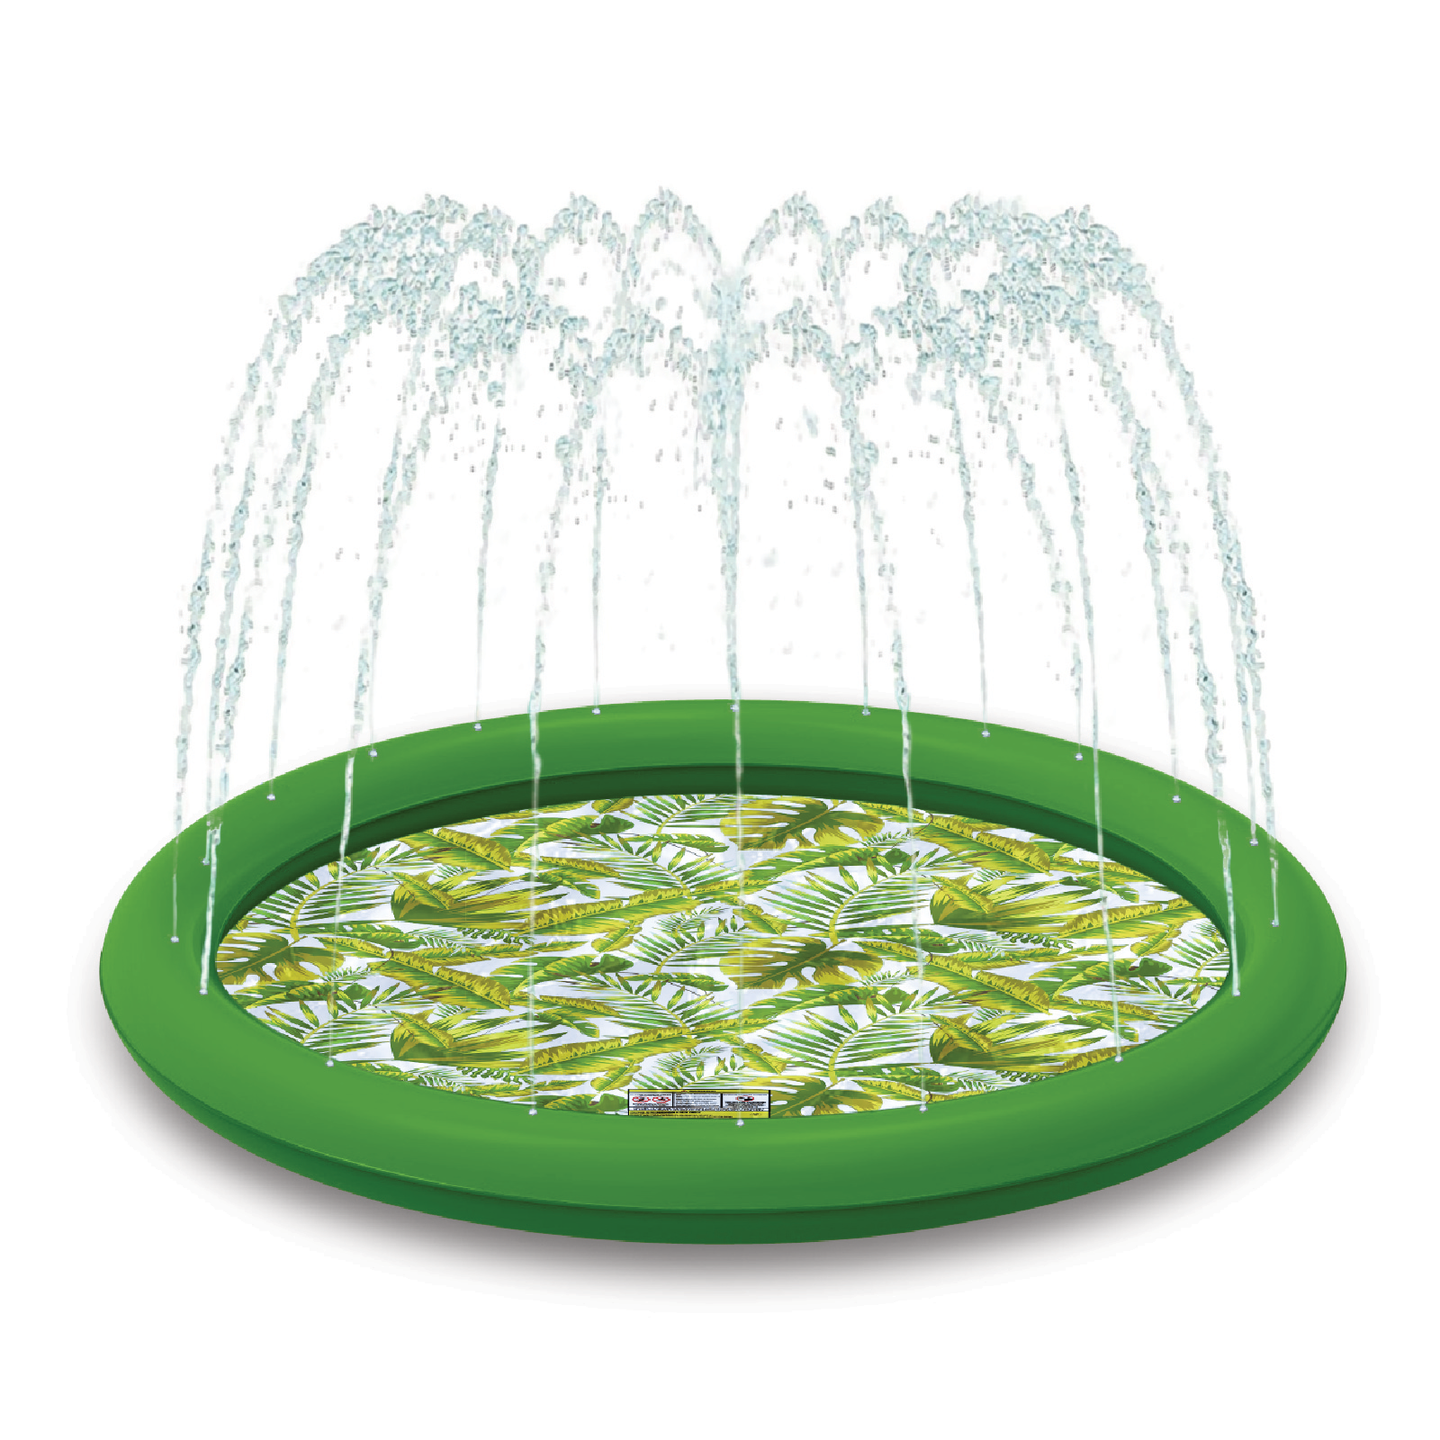 Tropical Splash Pad for kids by FUNBOY